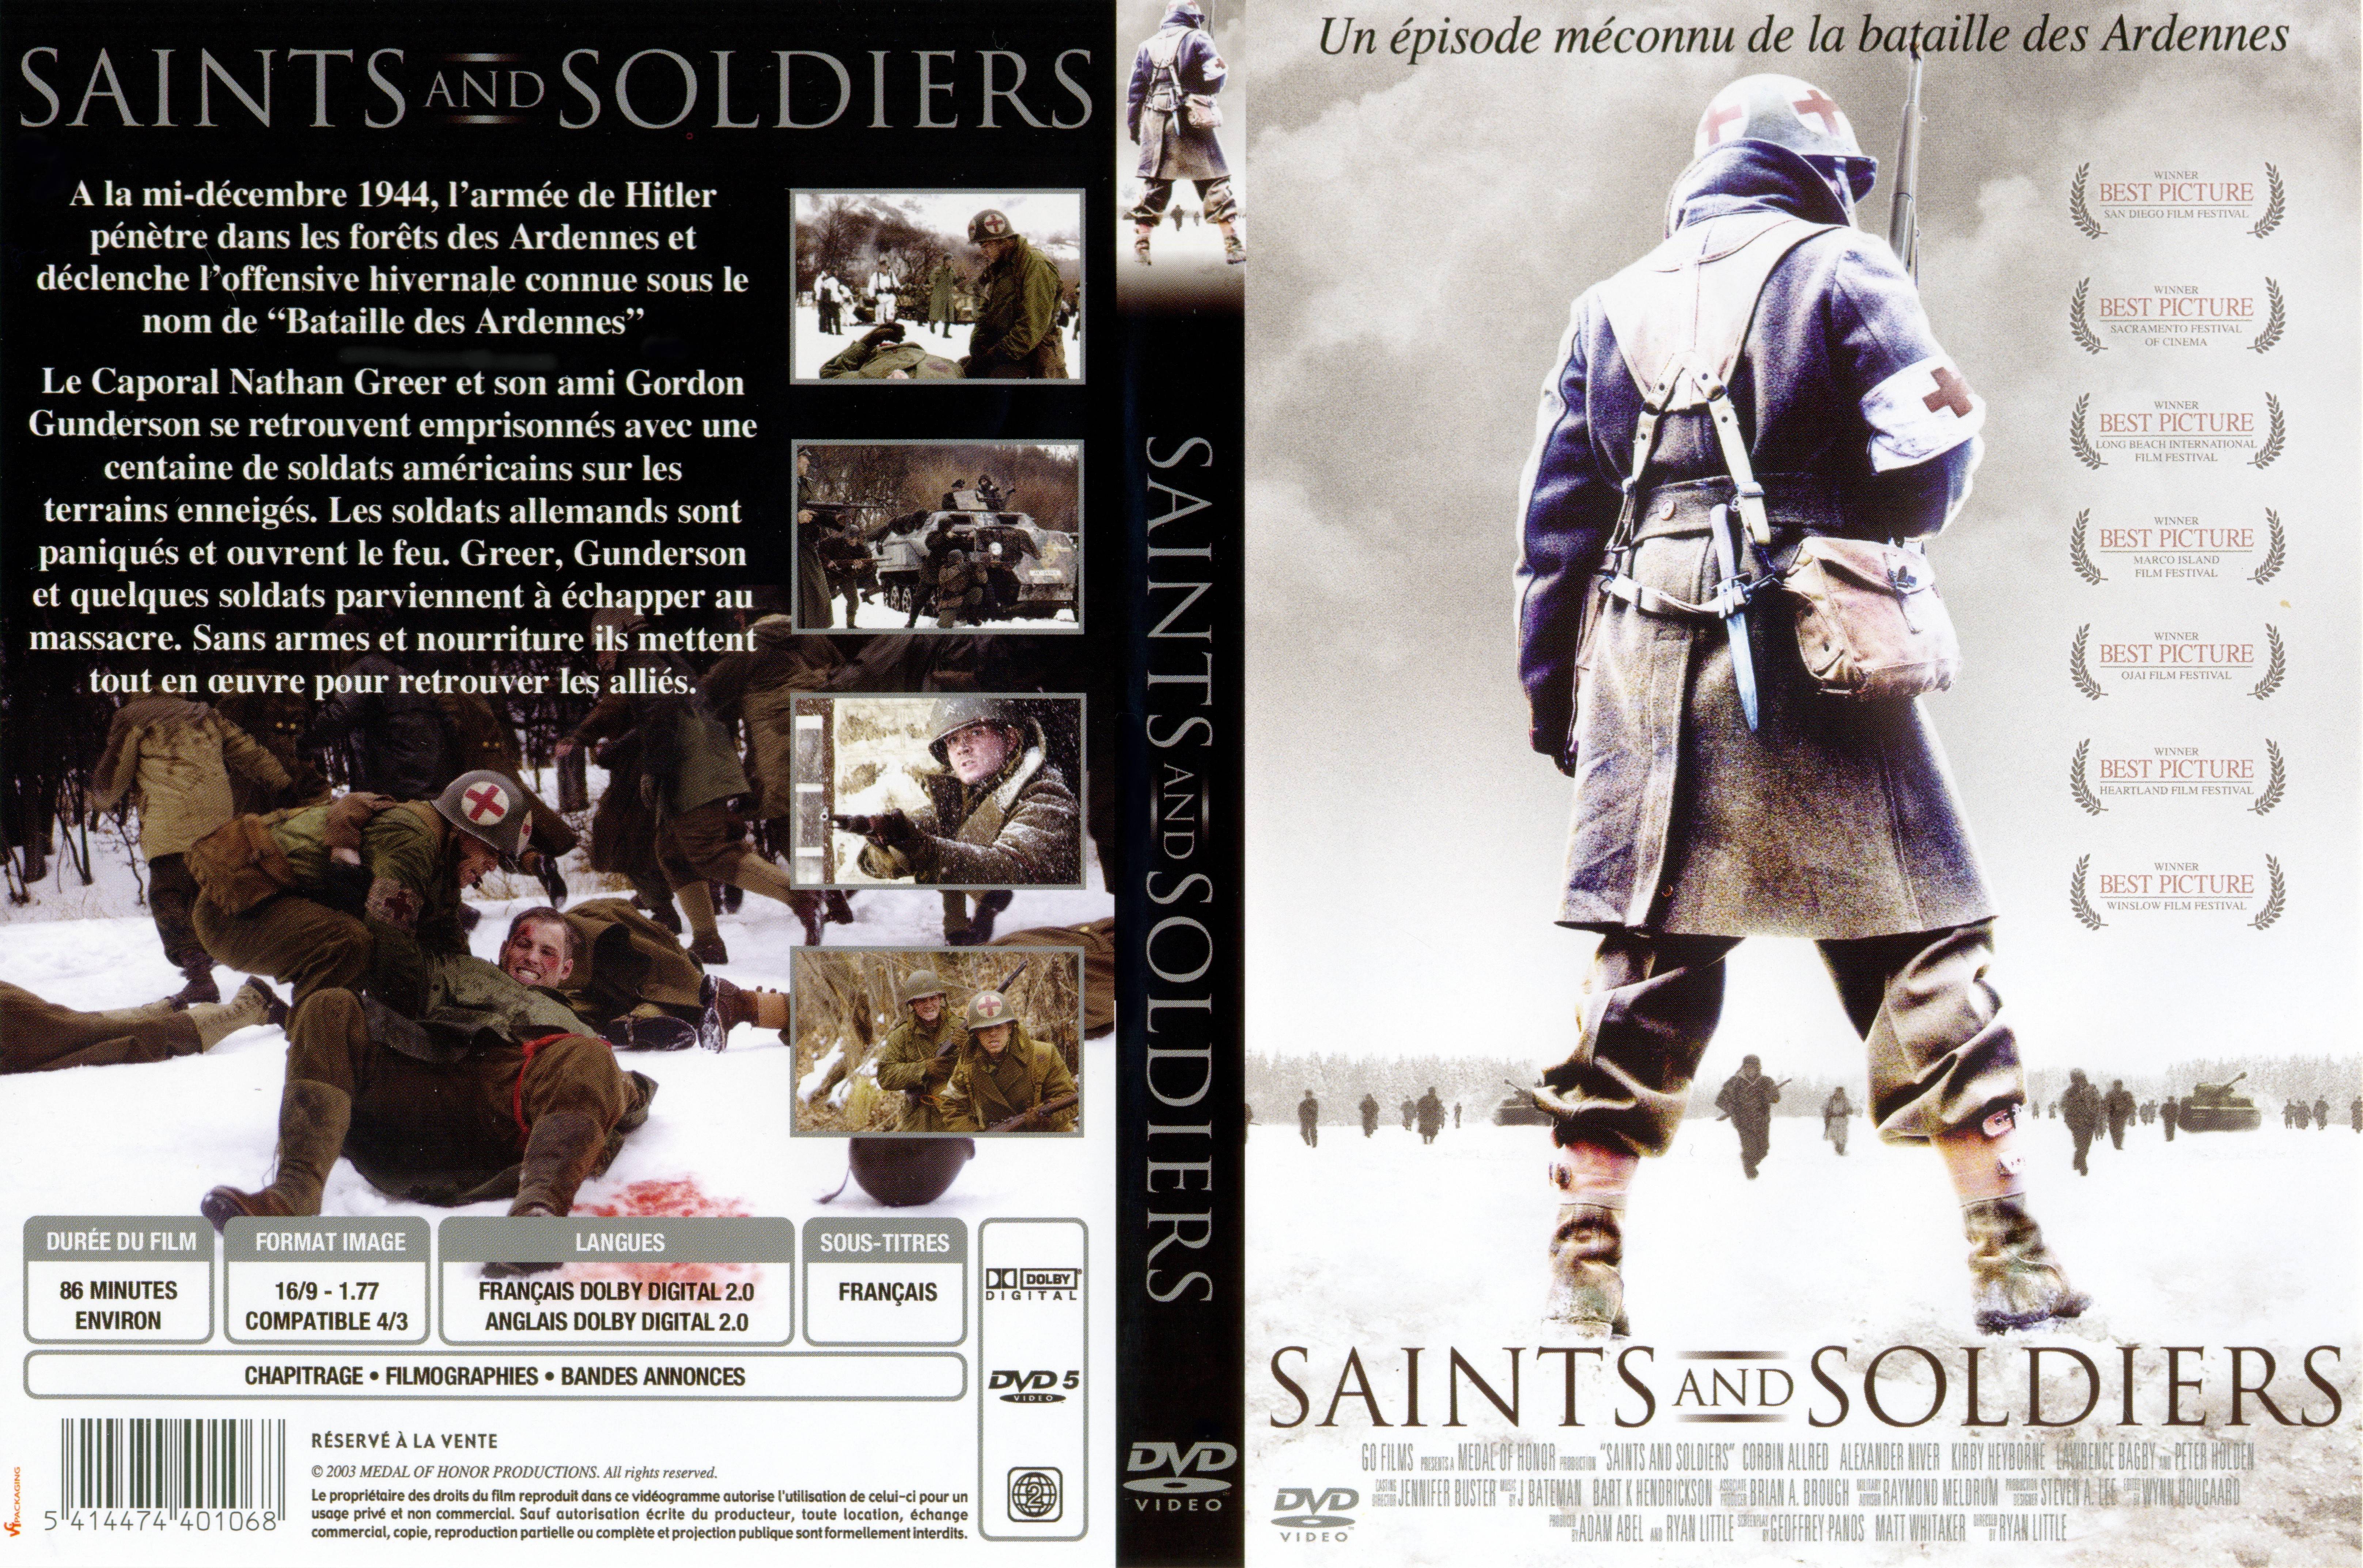 Jaquette DVD Saints and soldiers v2